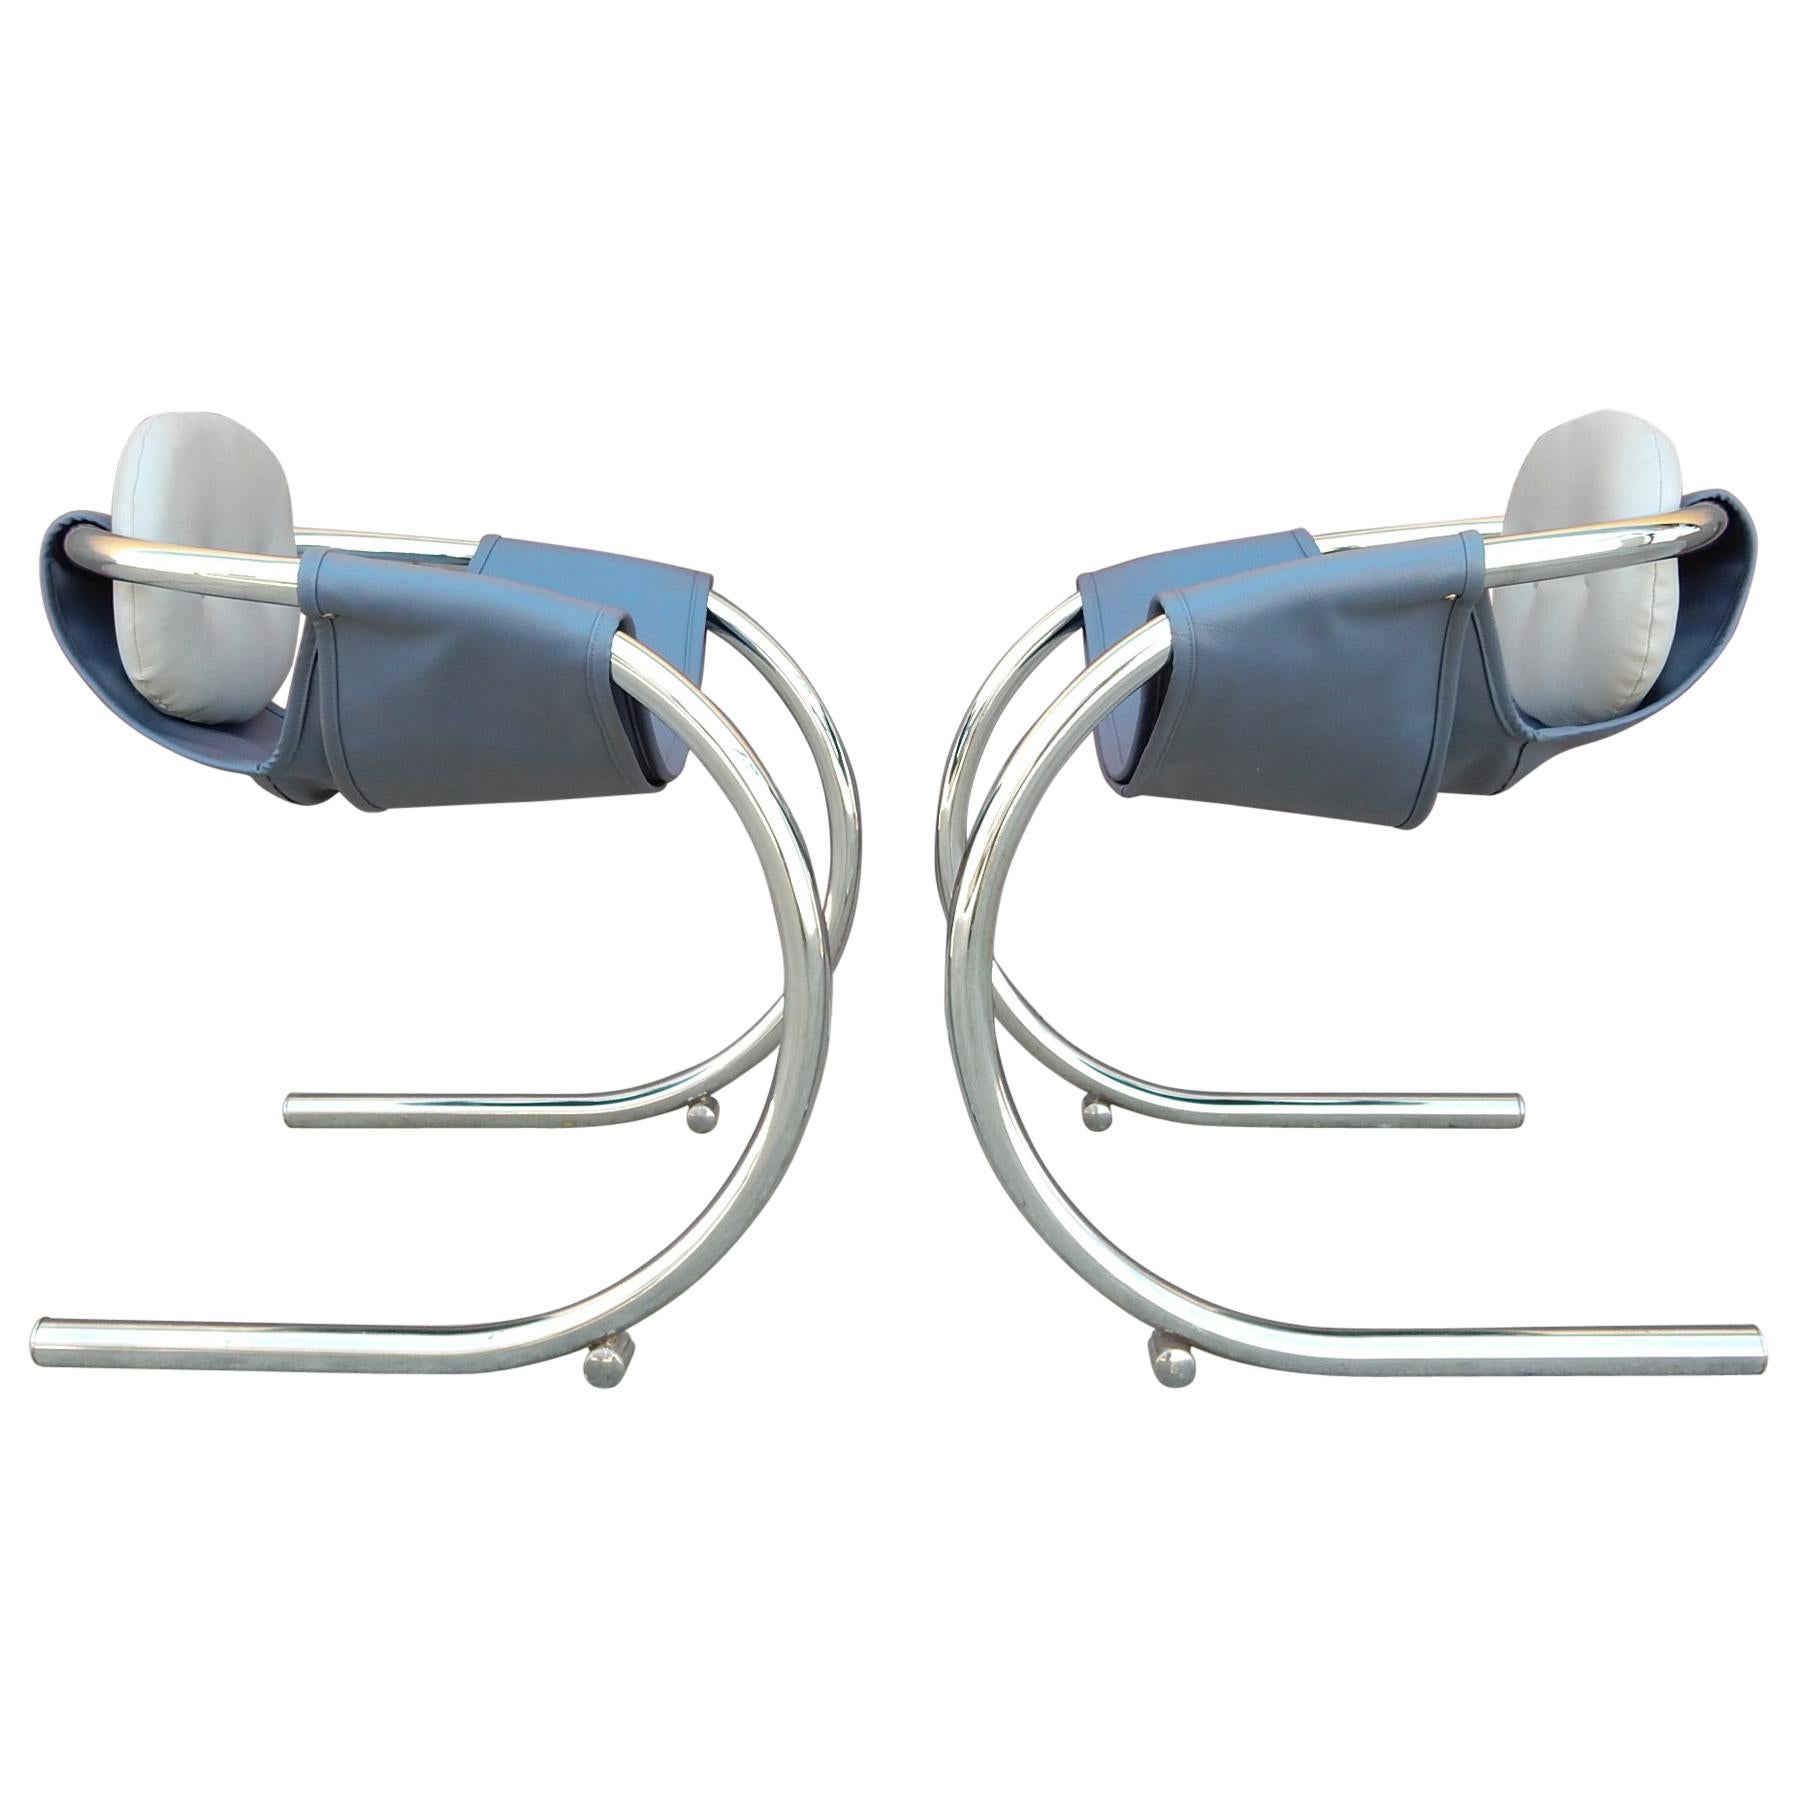 Pair of fat chrome-plated steel tube sling lounge chairs designed by Byron Botker for Landes of California.
Very comfortable and super cool. New premium vinyl sling in 2-tone steel blue and silver.
Solid chairs ready for use.